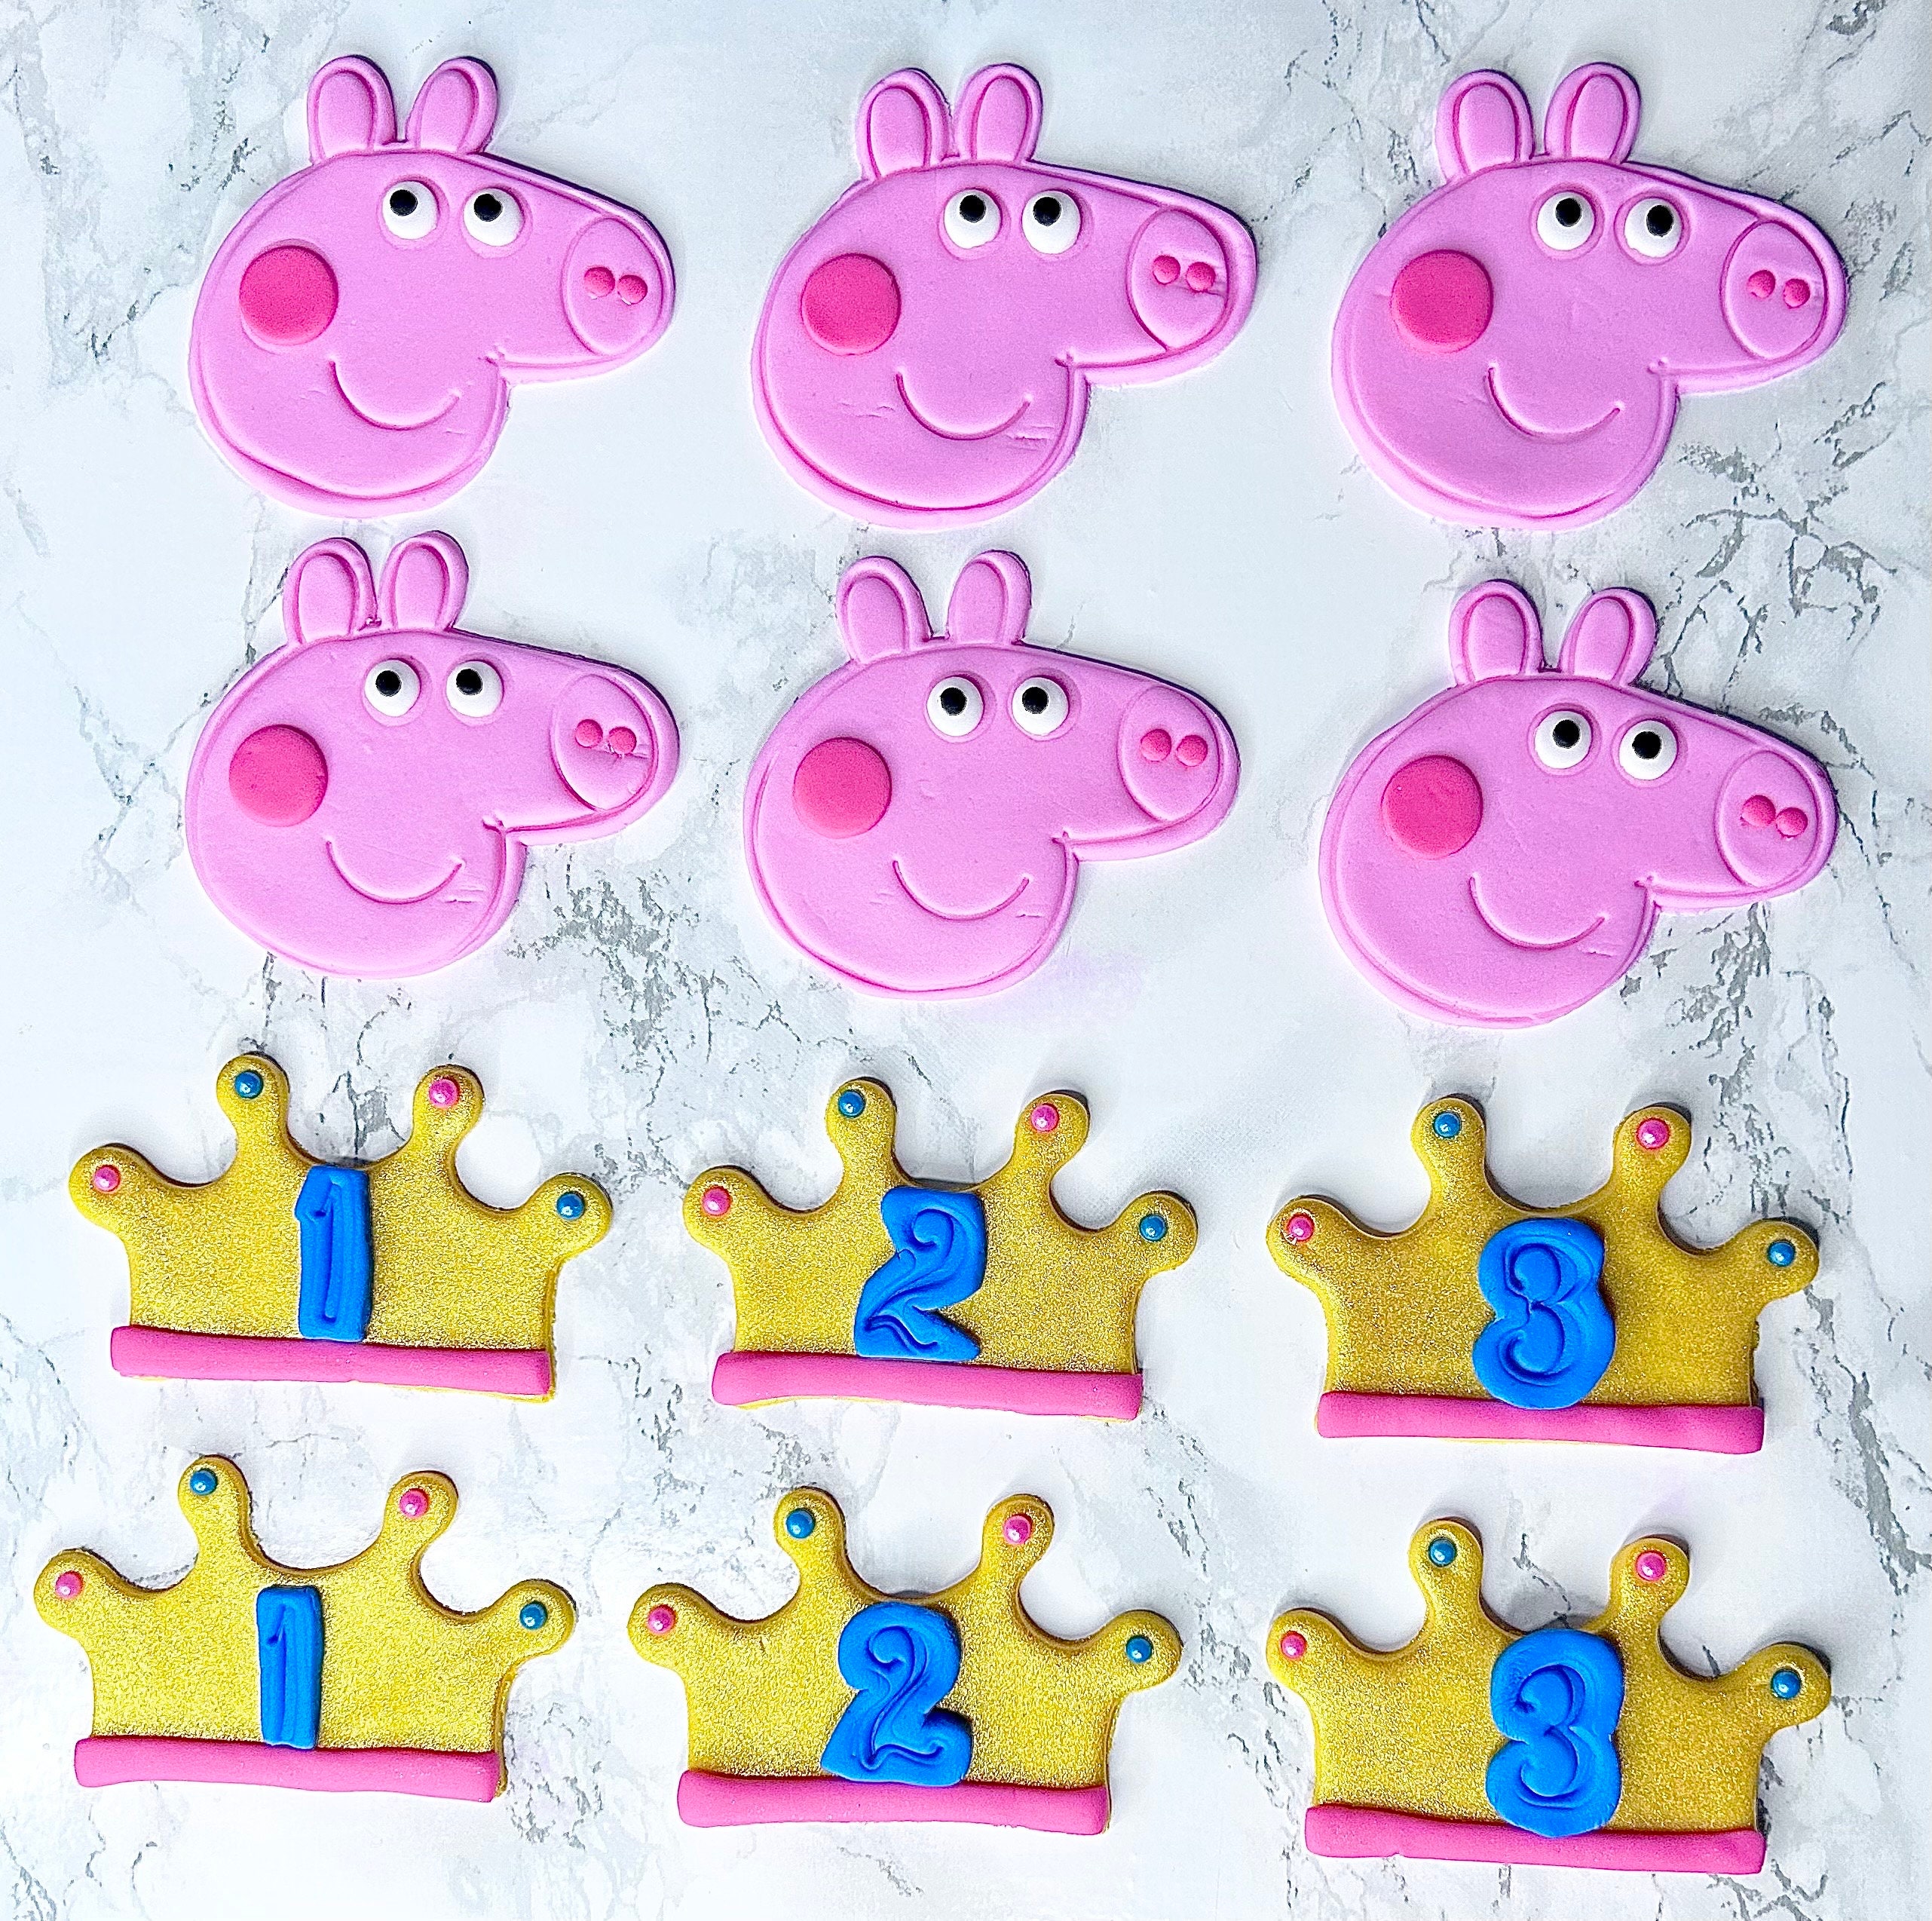 Peppa Pig Cup Stock Photo 1123352192